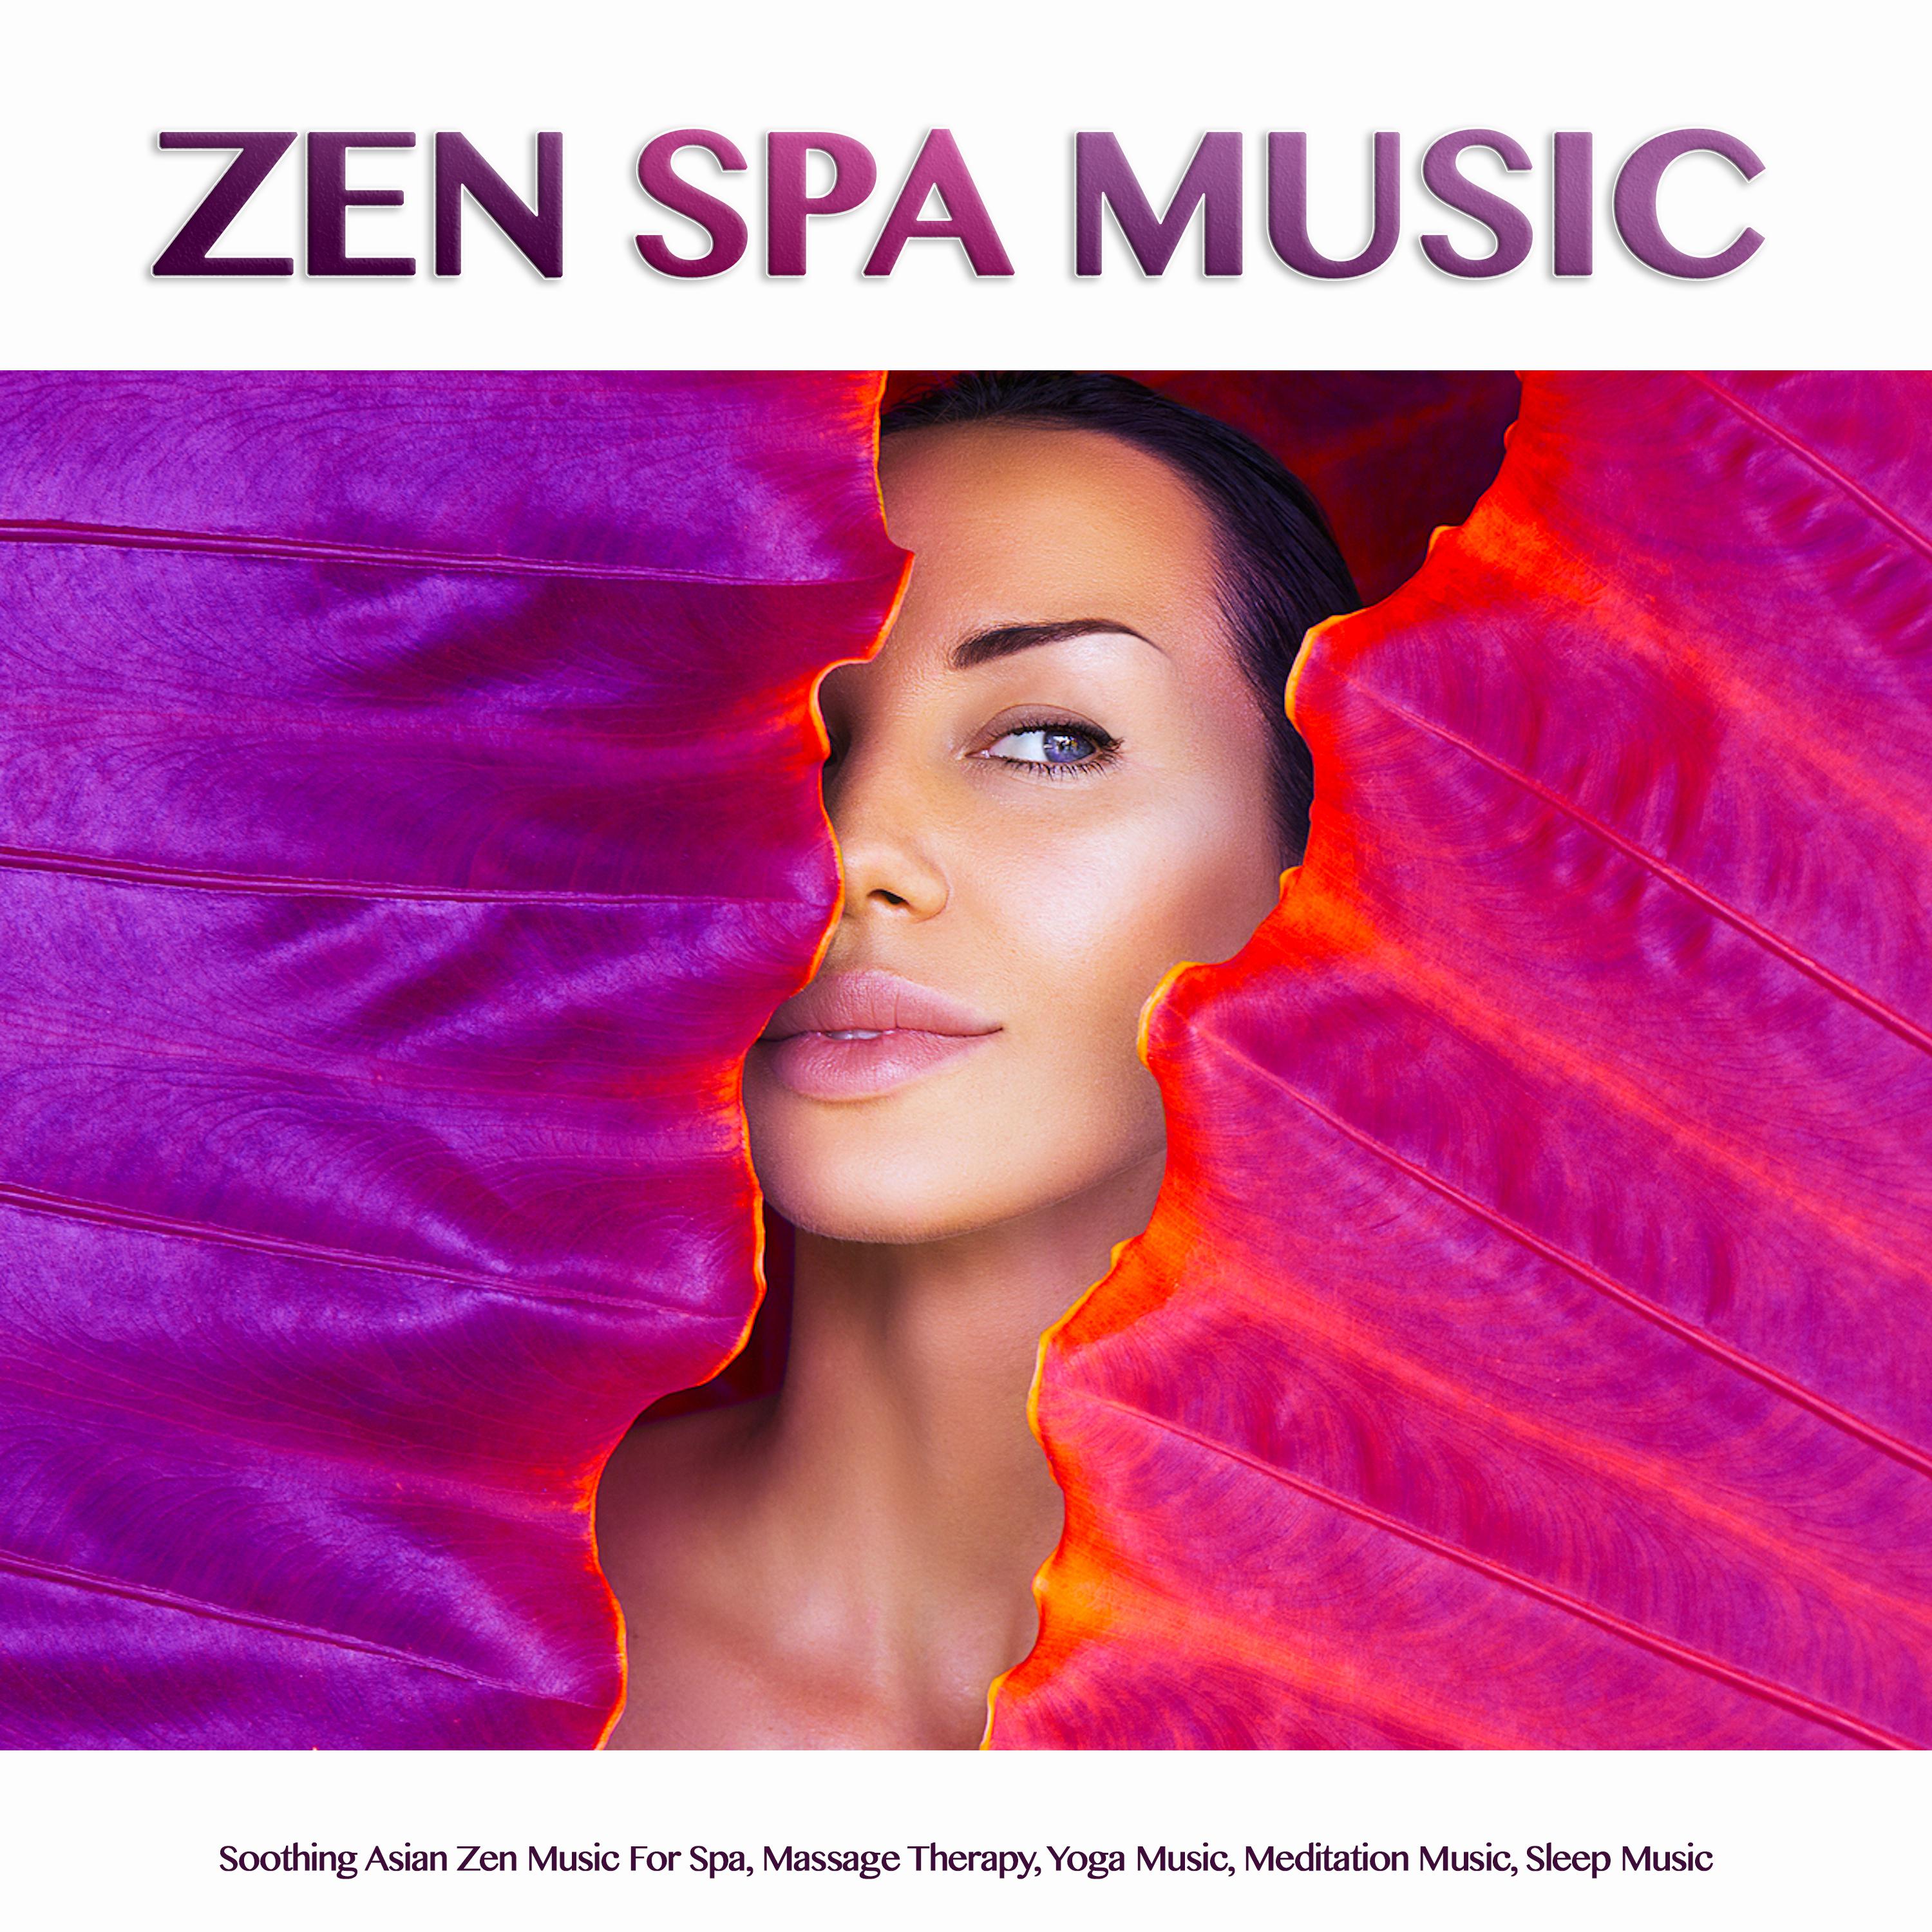 Zen Spa Music: Soothing Asian Zen Music For Spa, Massage Therapy, Yoga Music, Meditation Music, Sleep Music